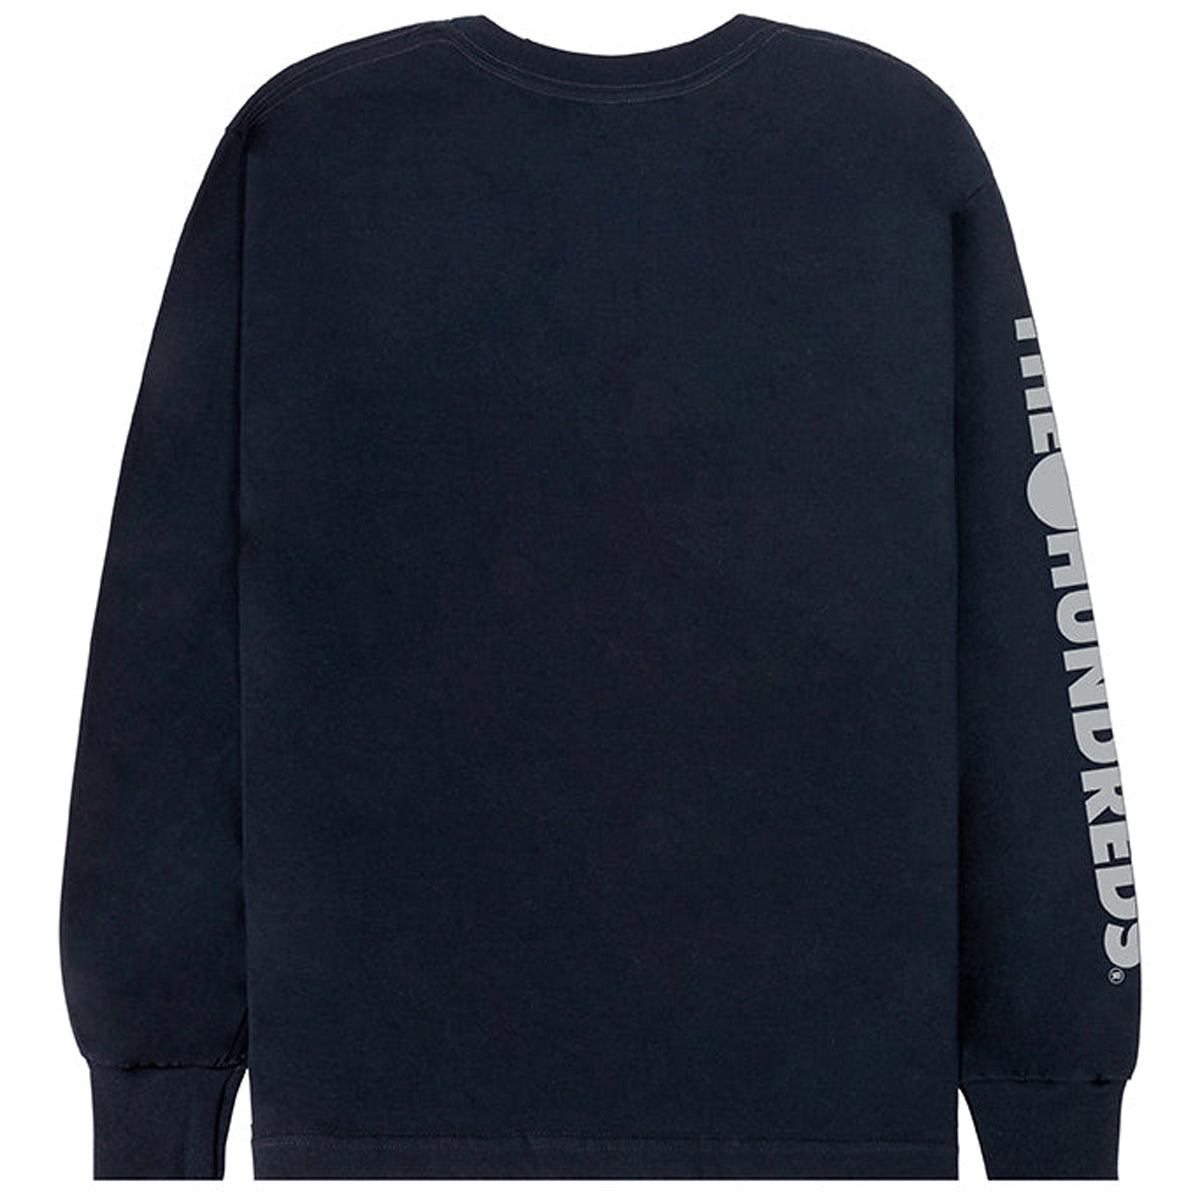 The Hundreds Solid Bomb Crest Long Sleeve T-Shirt - True Navy image 2